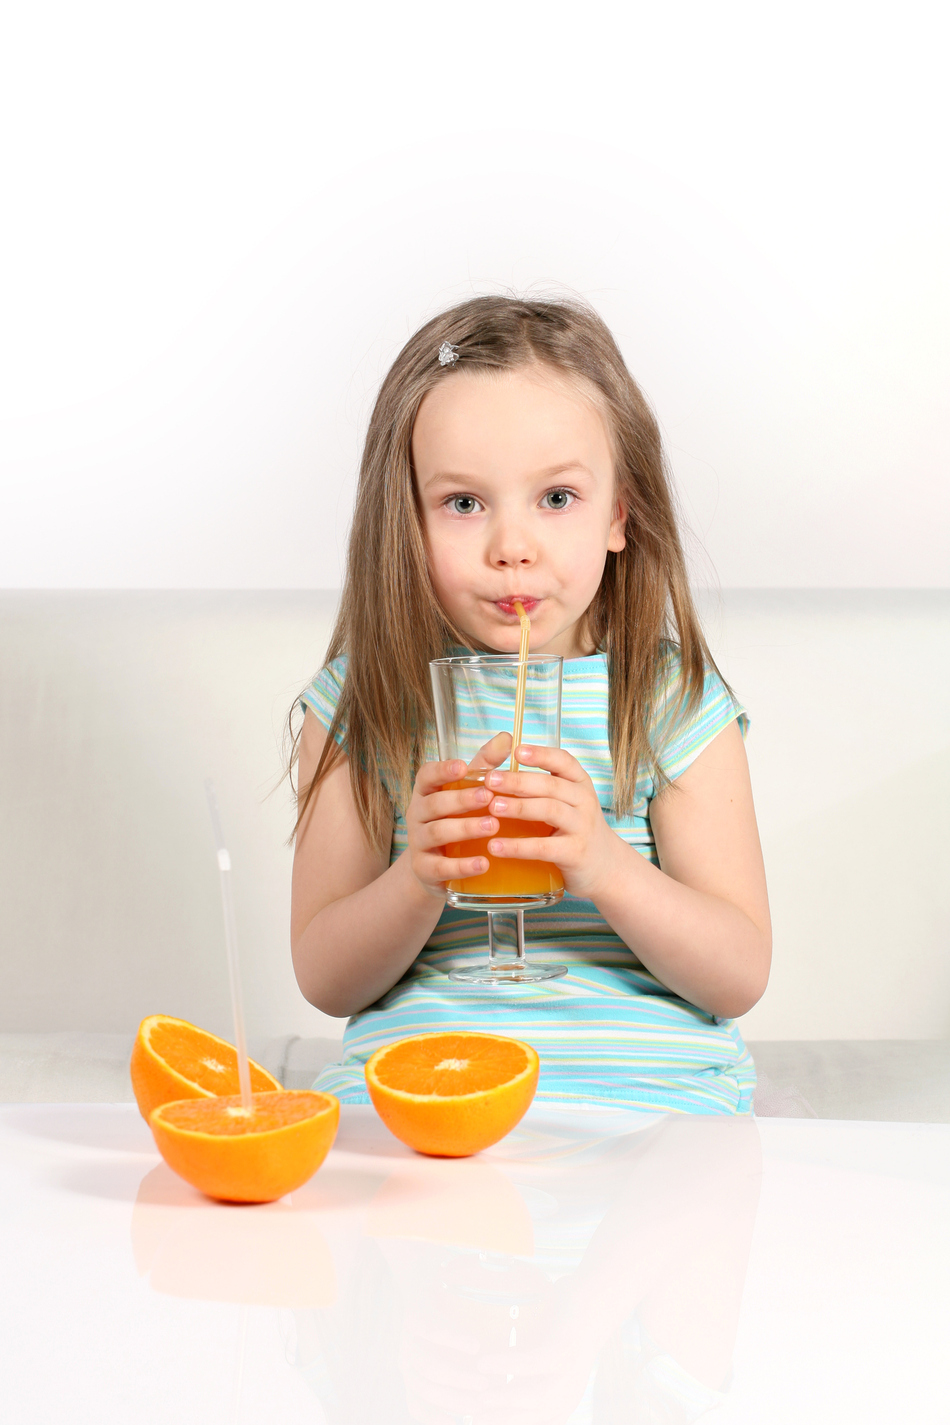 Debunking Old Wives' Tales: Juice is Healthy for Kids